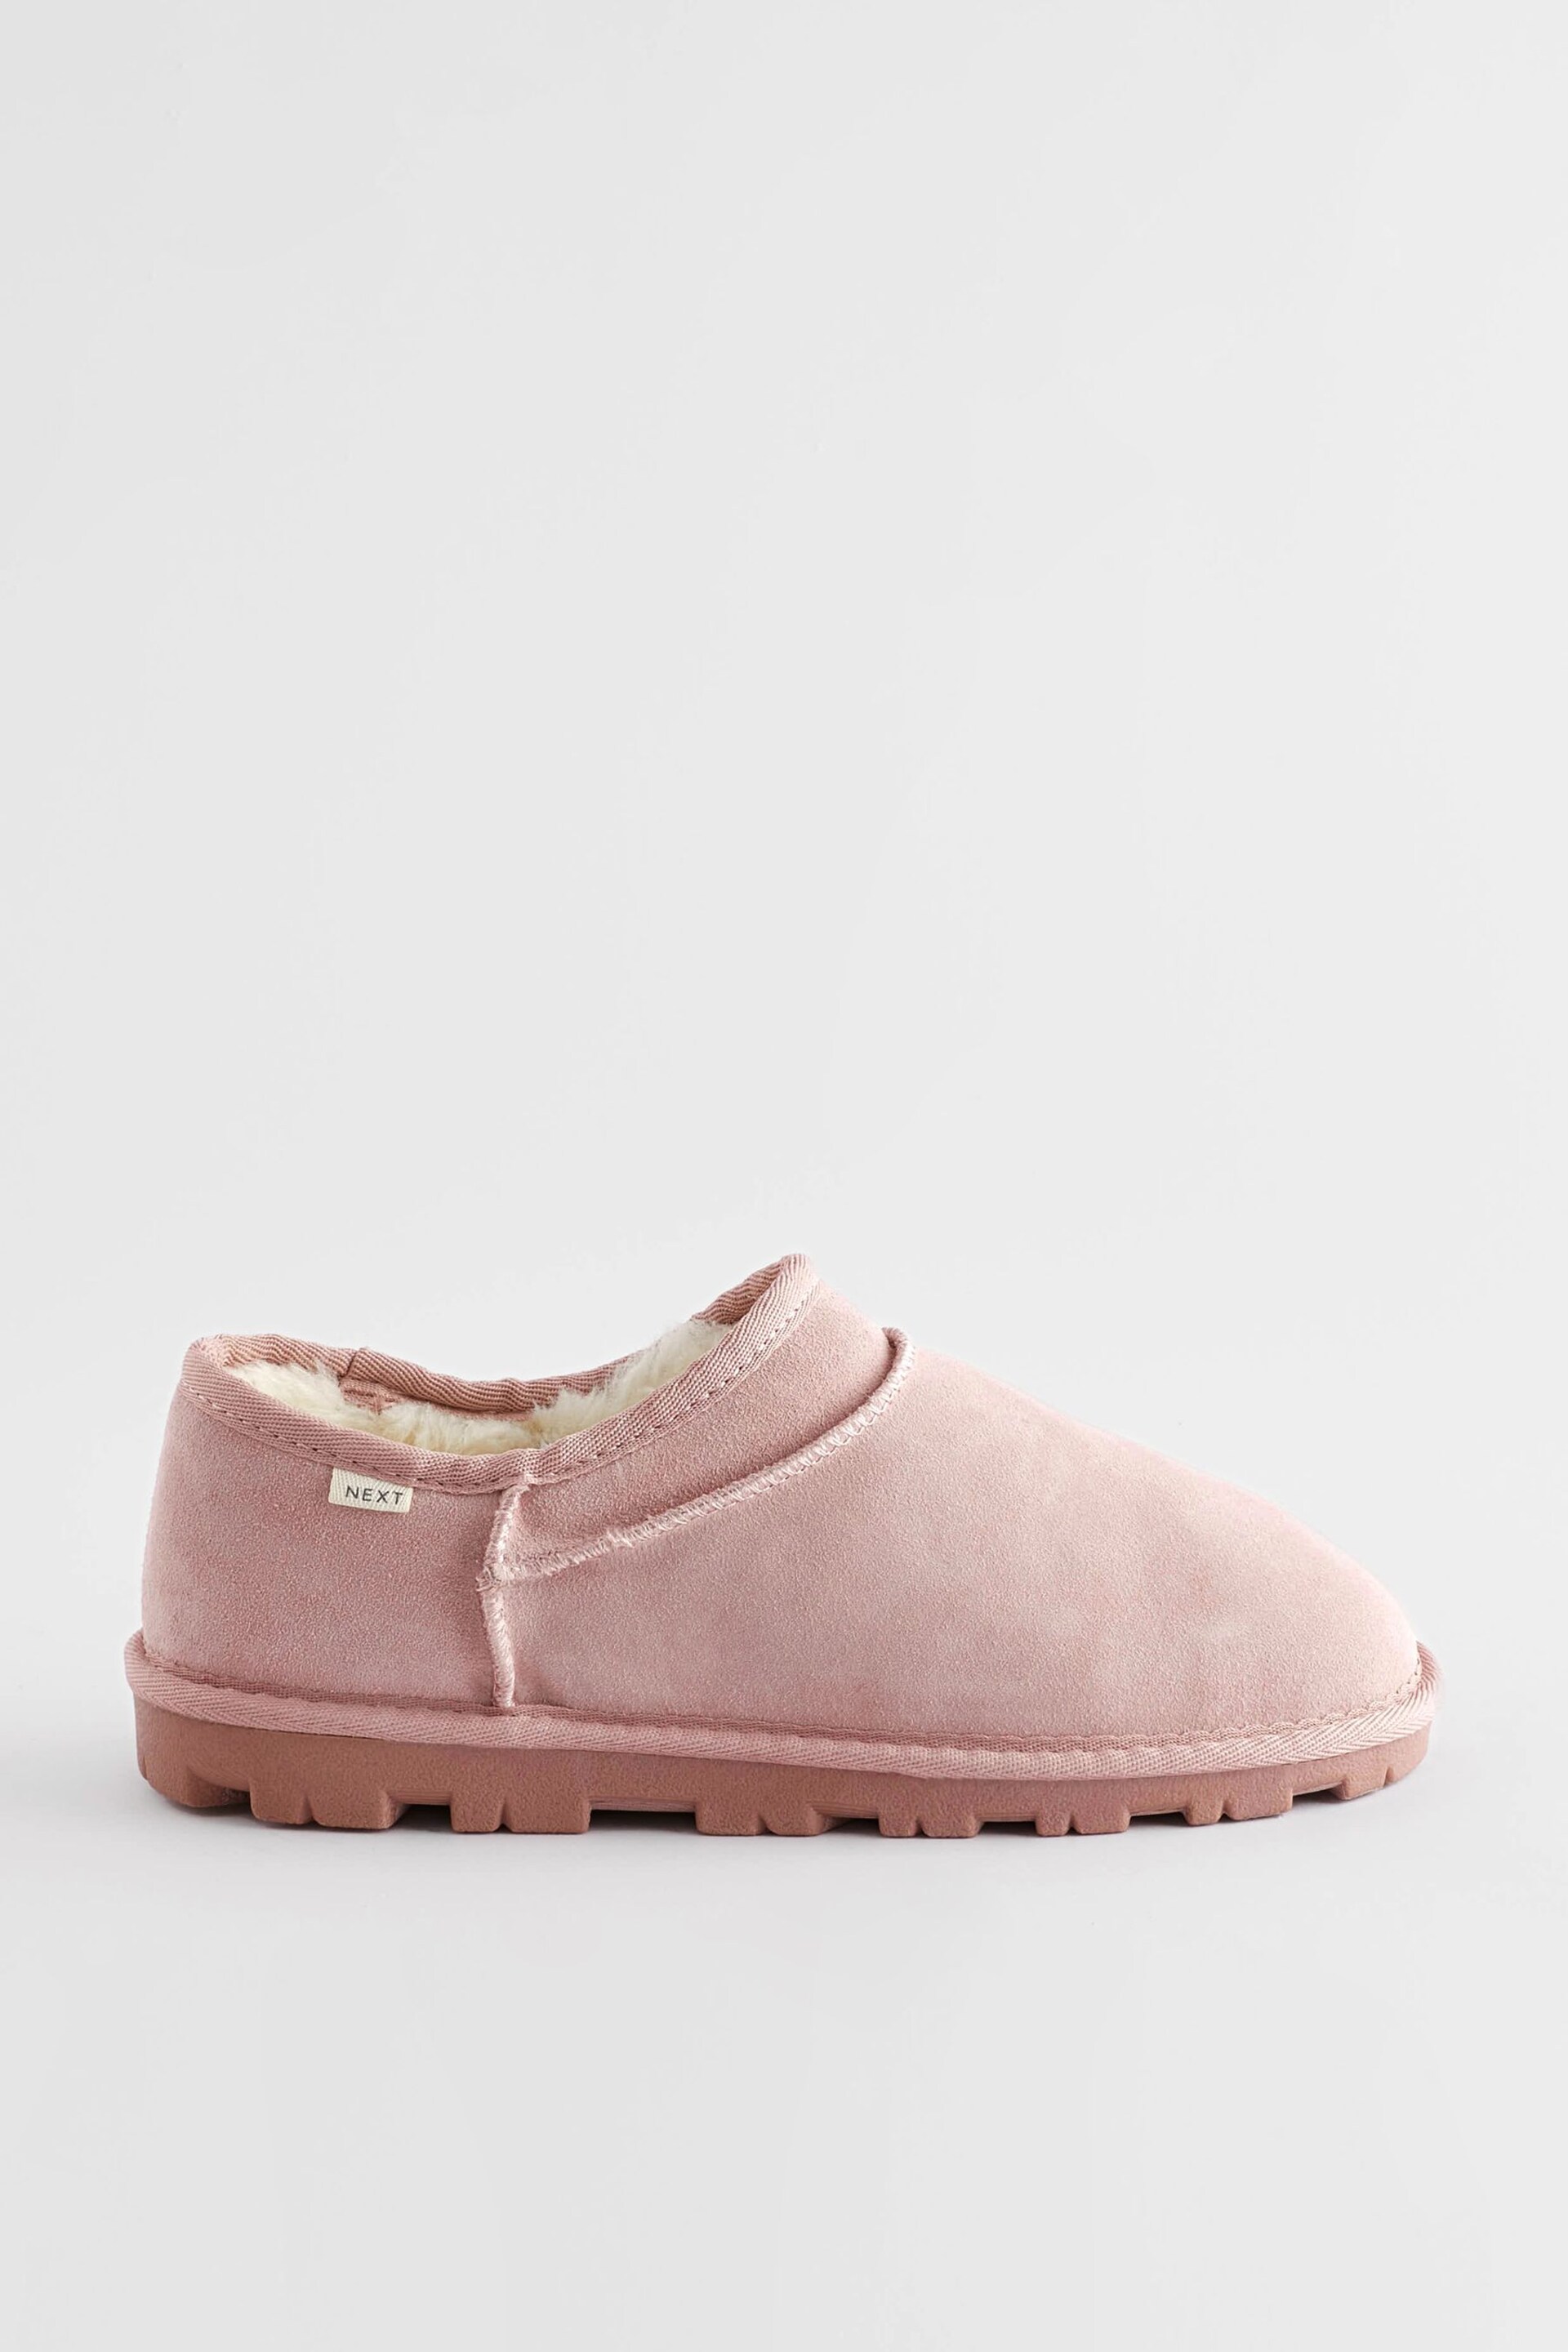 Pink Suede Shoot Slippers - Image 4 of 8